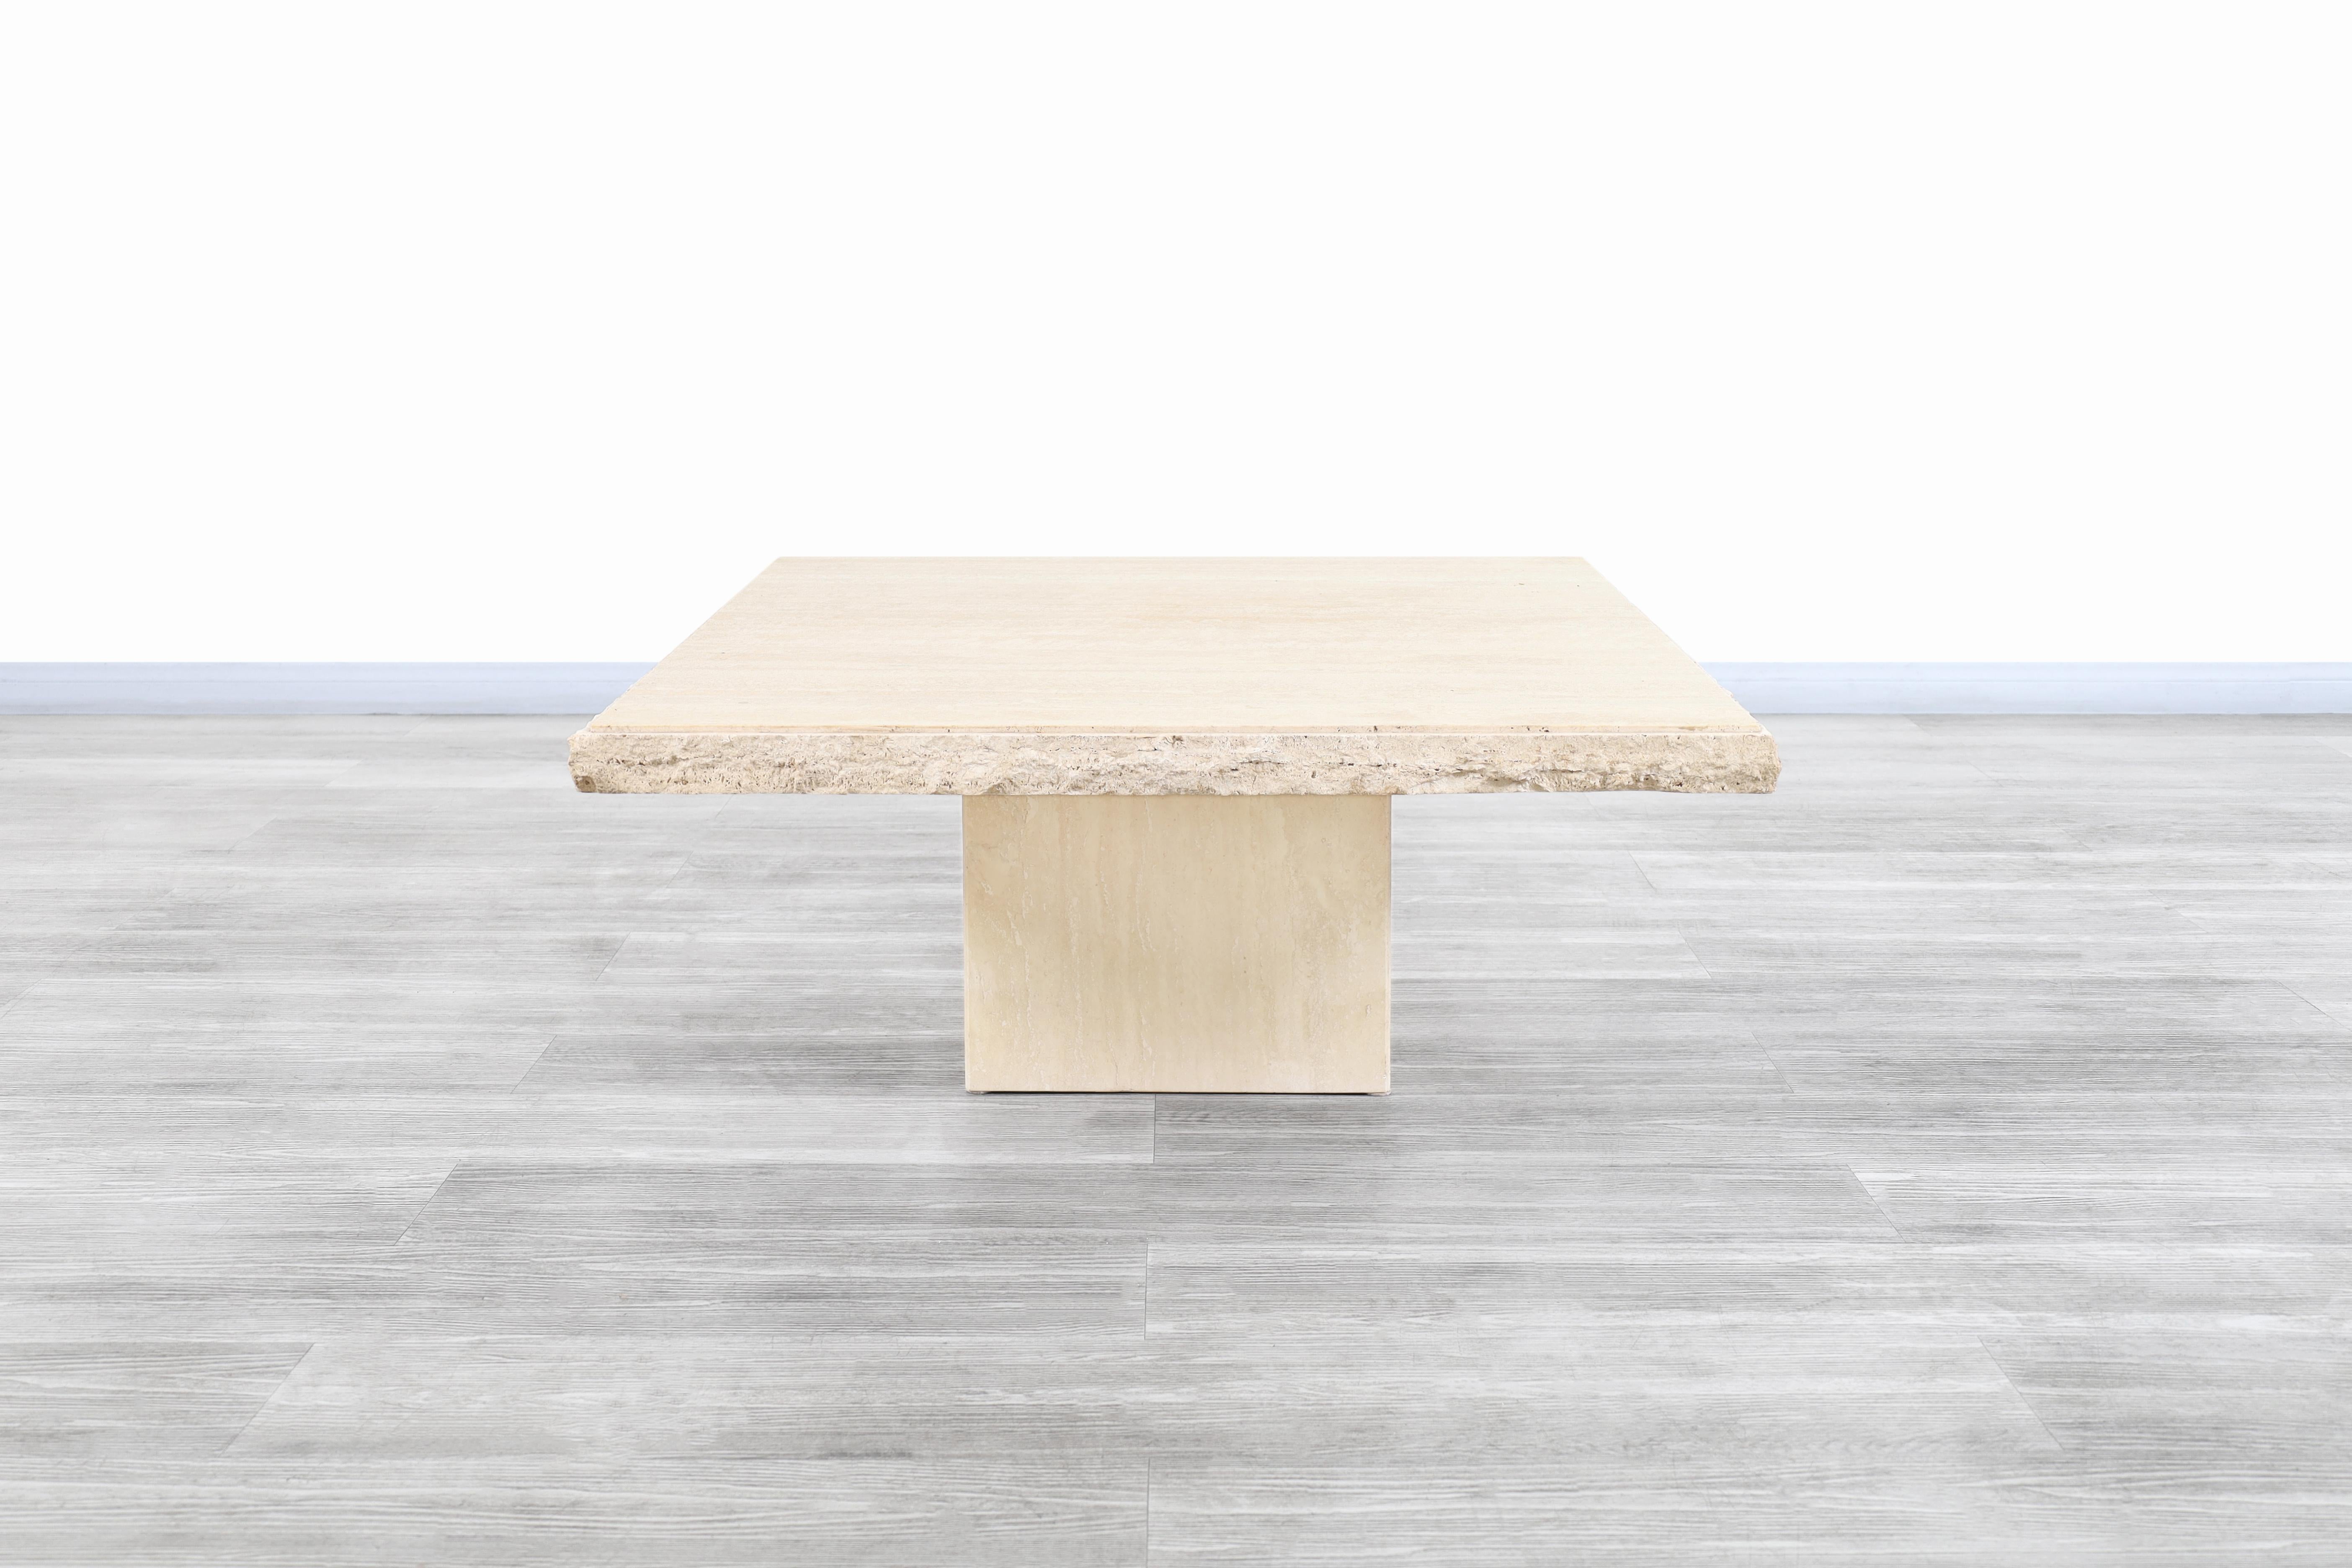 Wonderful Italian Modernist Edge travertine coffee tables designed and manufactured in Italy, circa 1970s. The modernist design is perfectly complemented by the natural minerals of the travertine stone. The table features a square travertine top